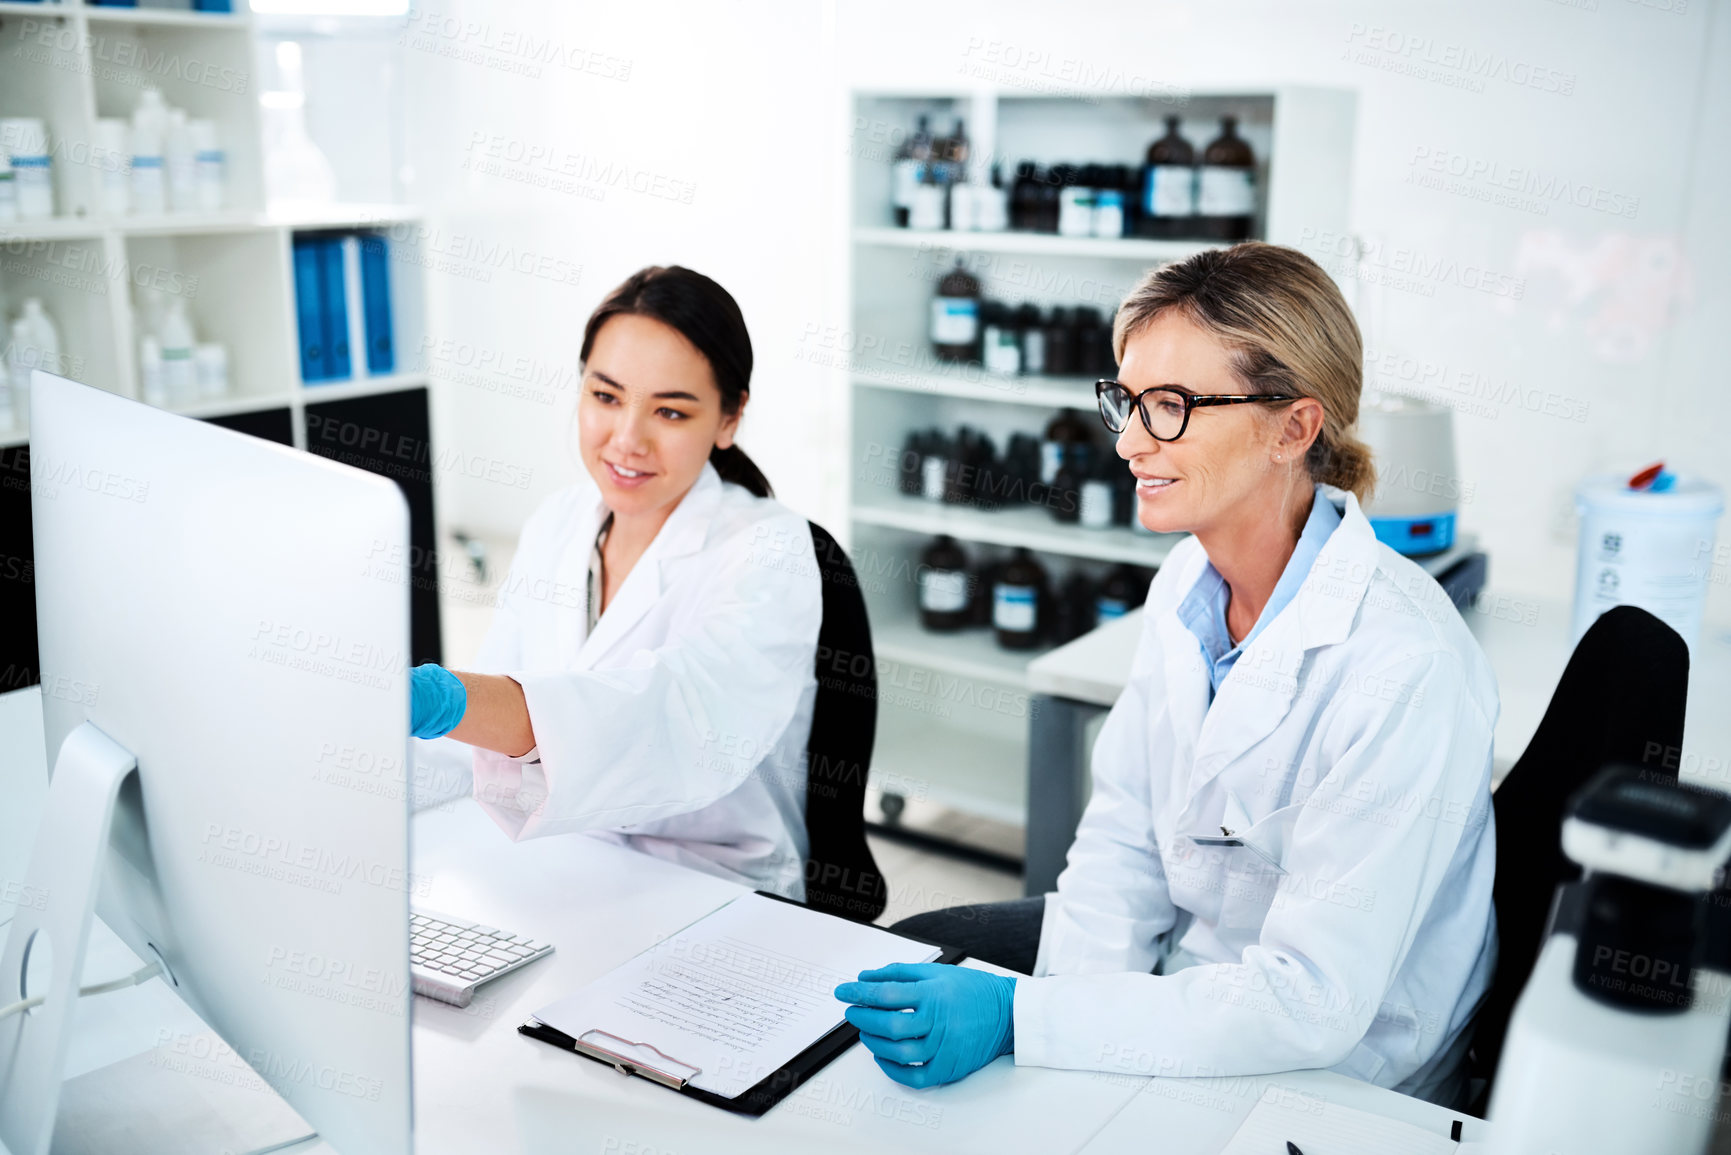 Buy stock photo Shot of two scientists working together on a computer in a lab